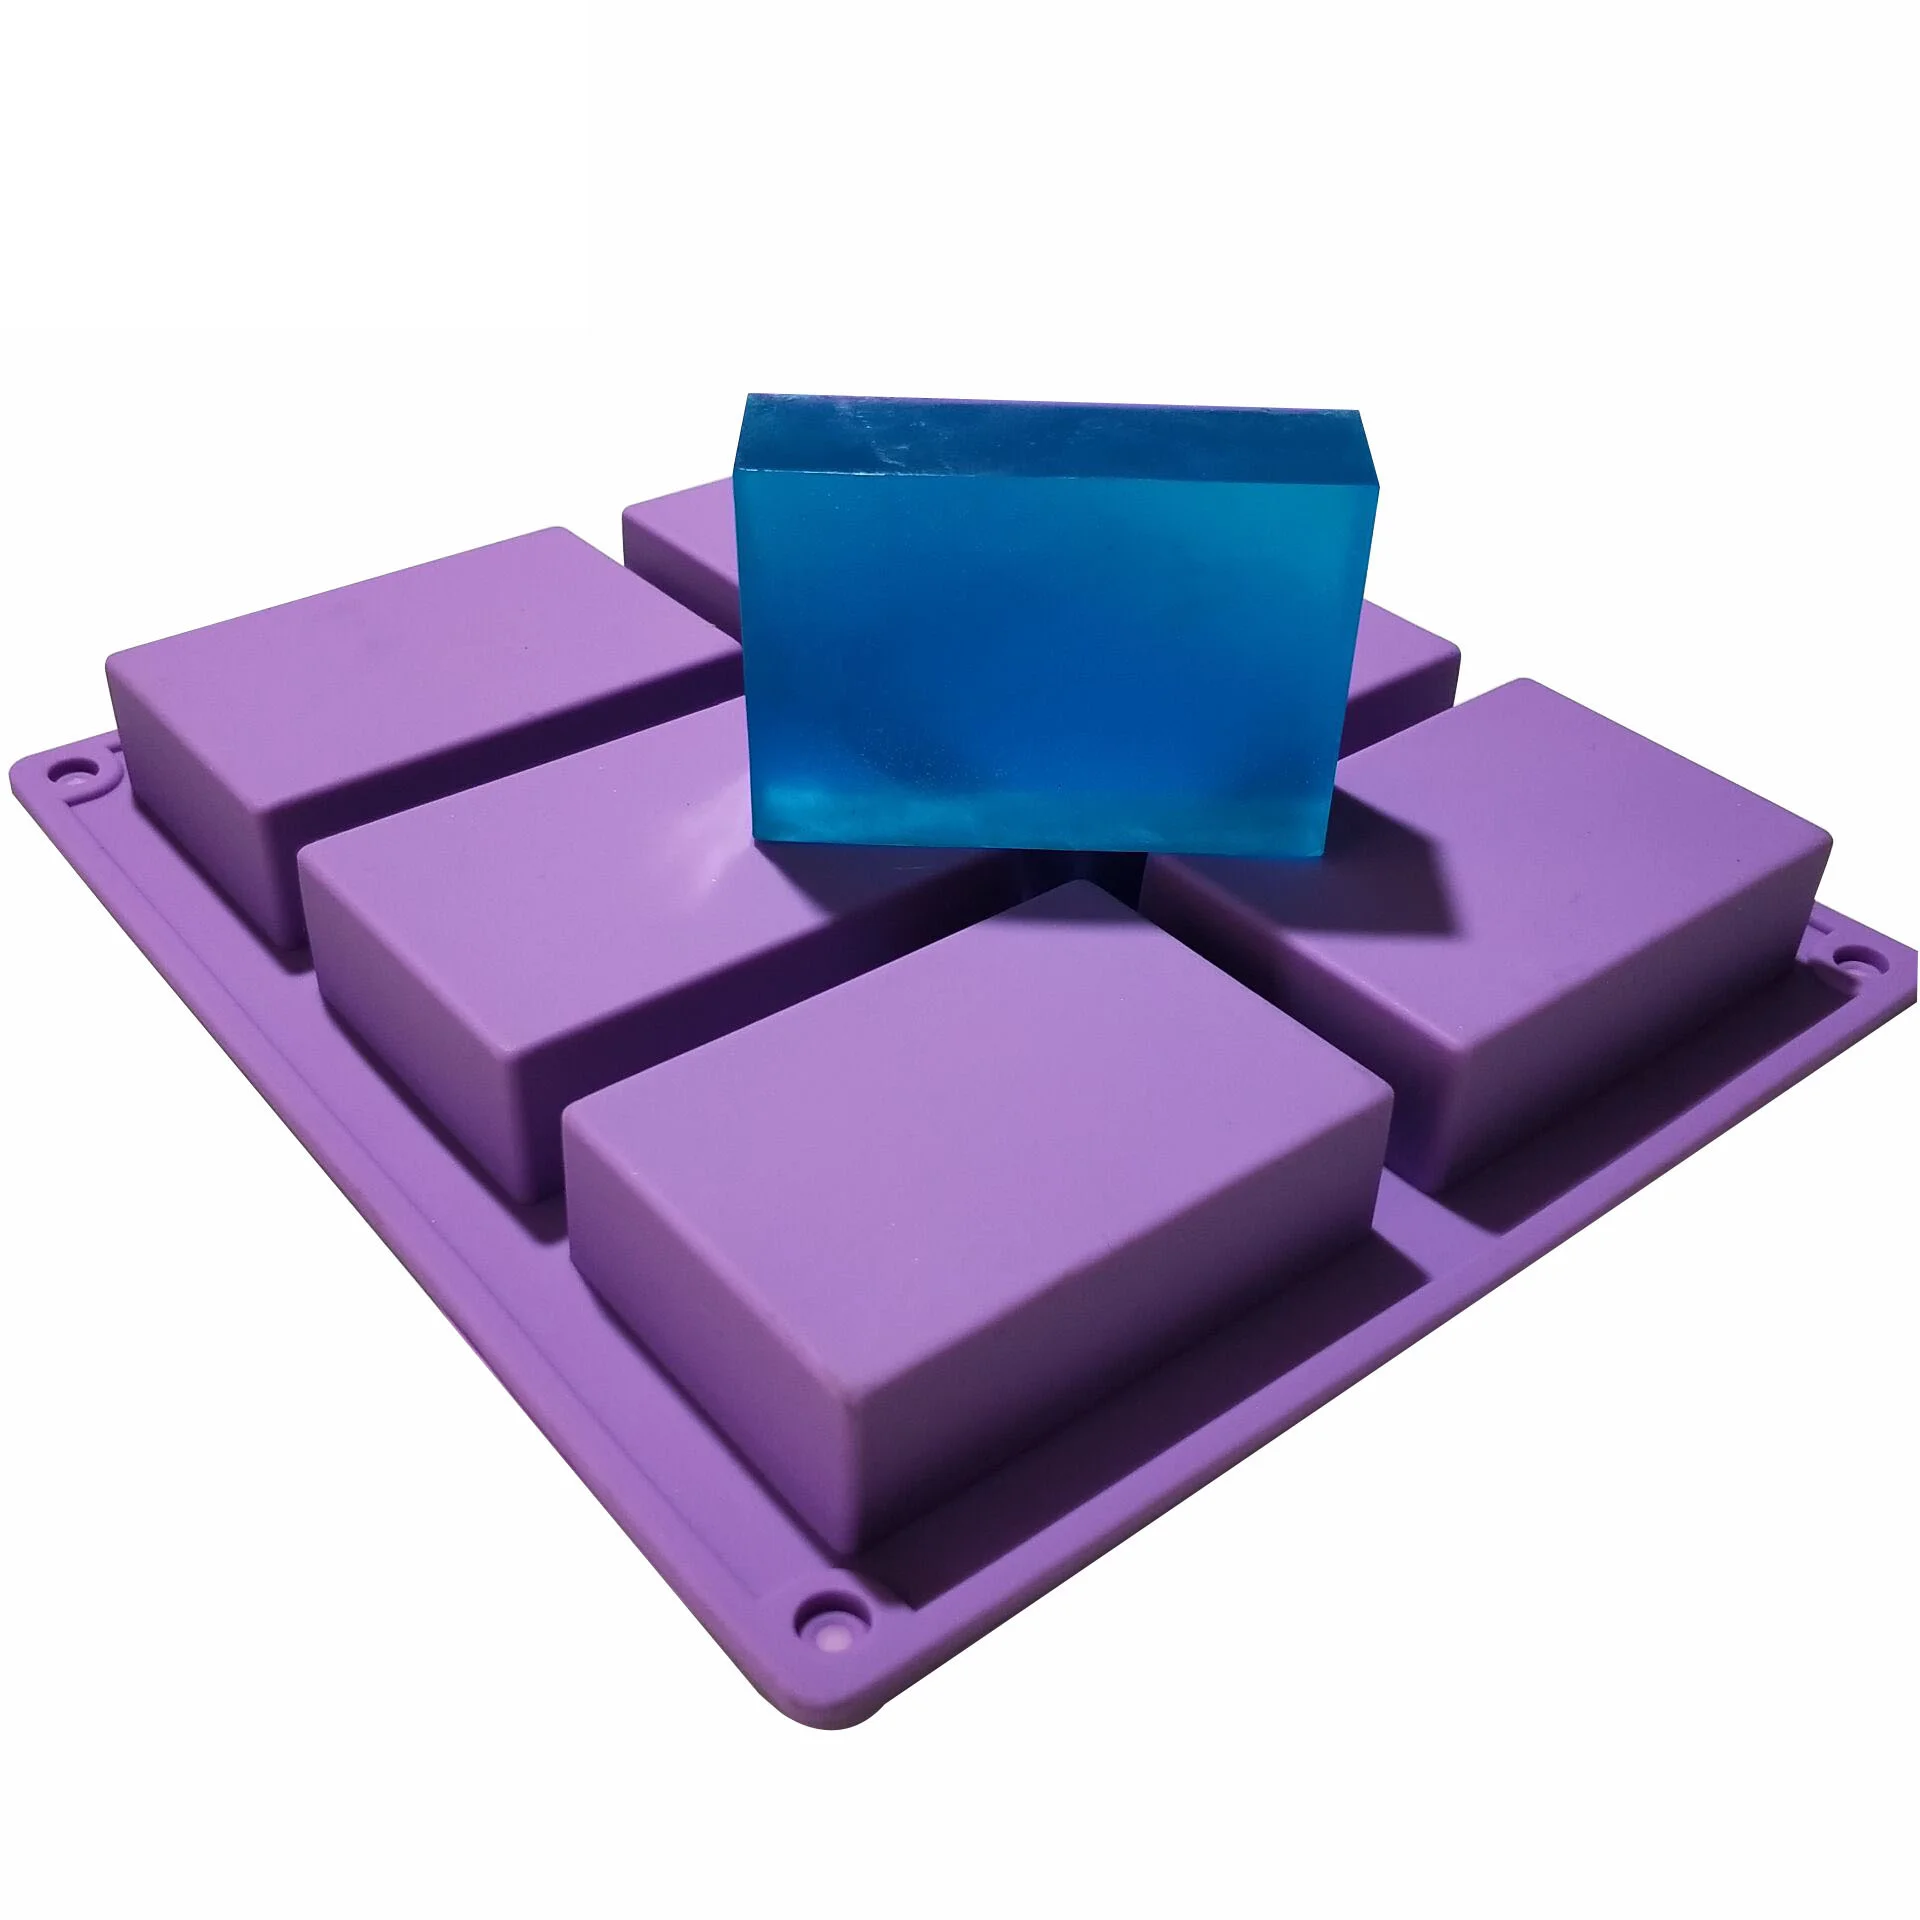 

6 Cavity soap molds for square soap mold Logo Custom Silicone Mold, As picture or as your request for silicone soap molds